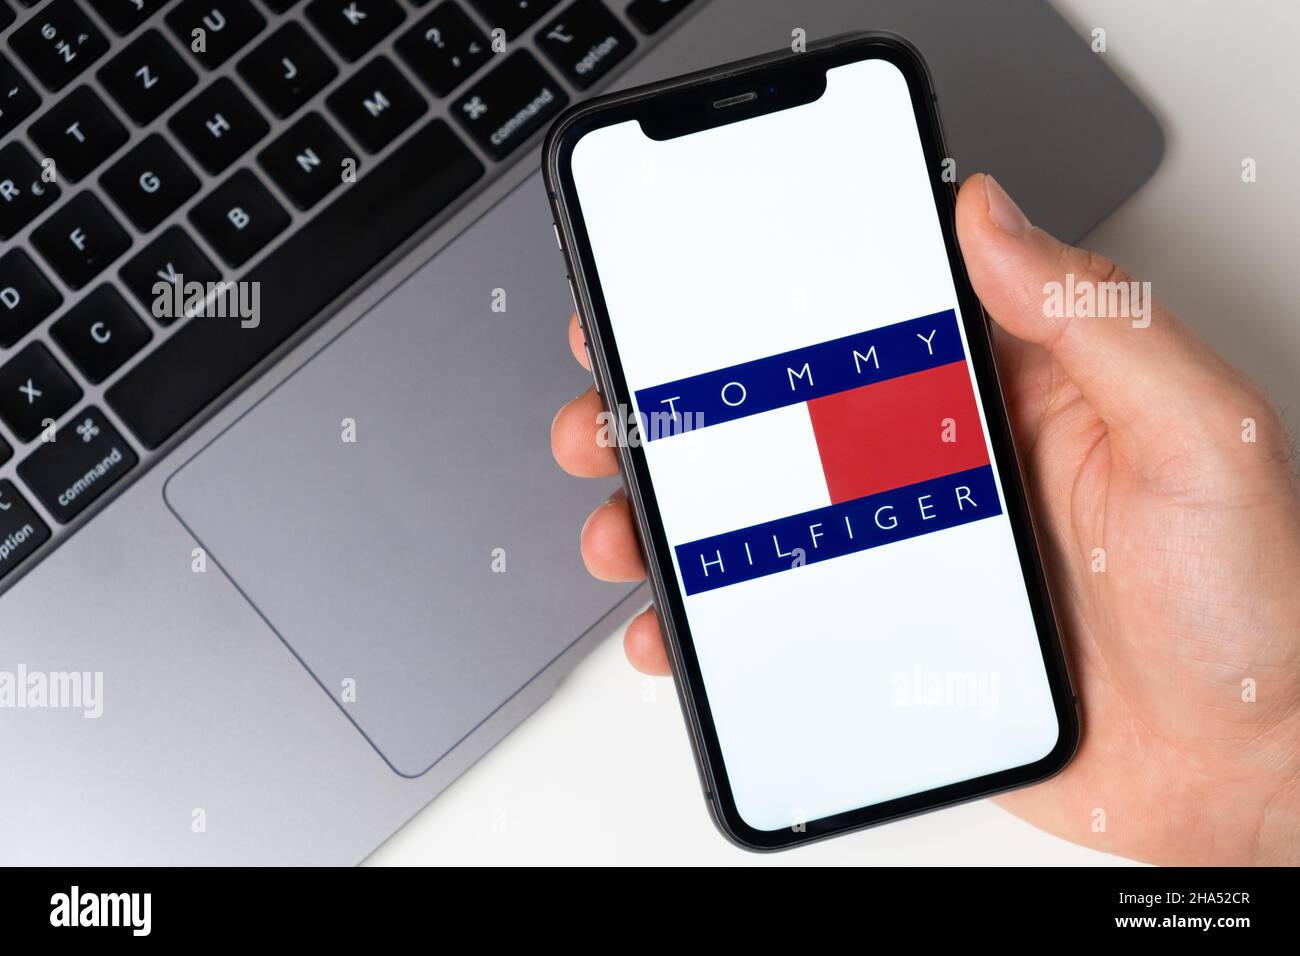 Tommy Hilfiger application logo for online shopping on the screen of mobile  phone. Man hand holding a smartphone with application. November 2021, San  Francisco, USA Stock Photo - Alamy